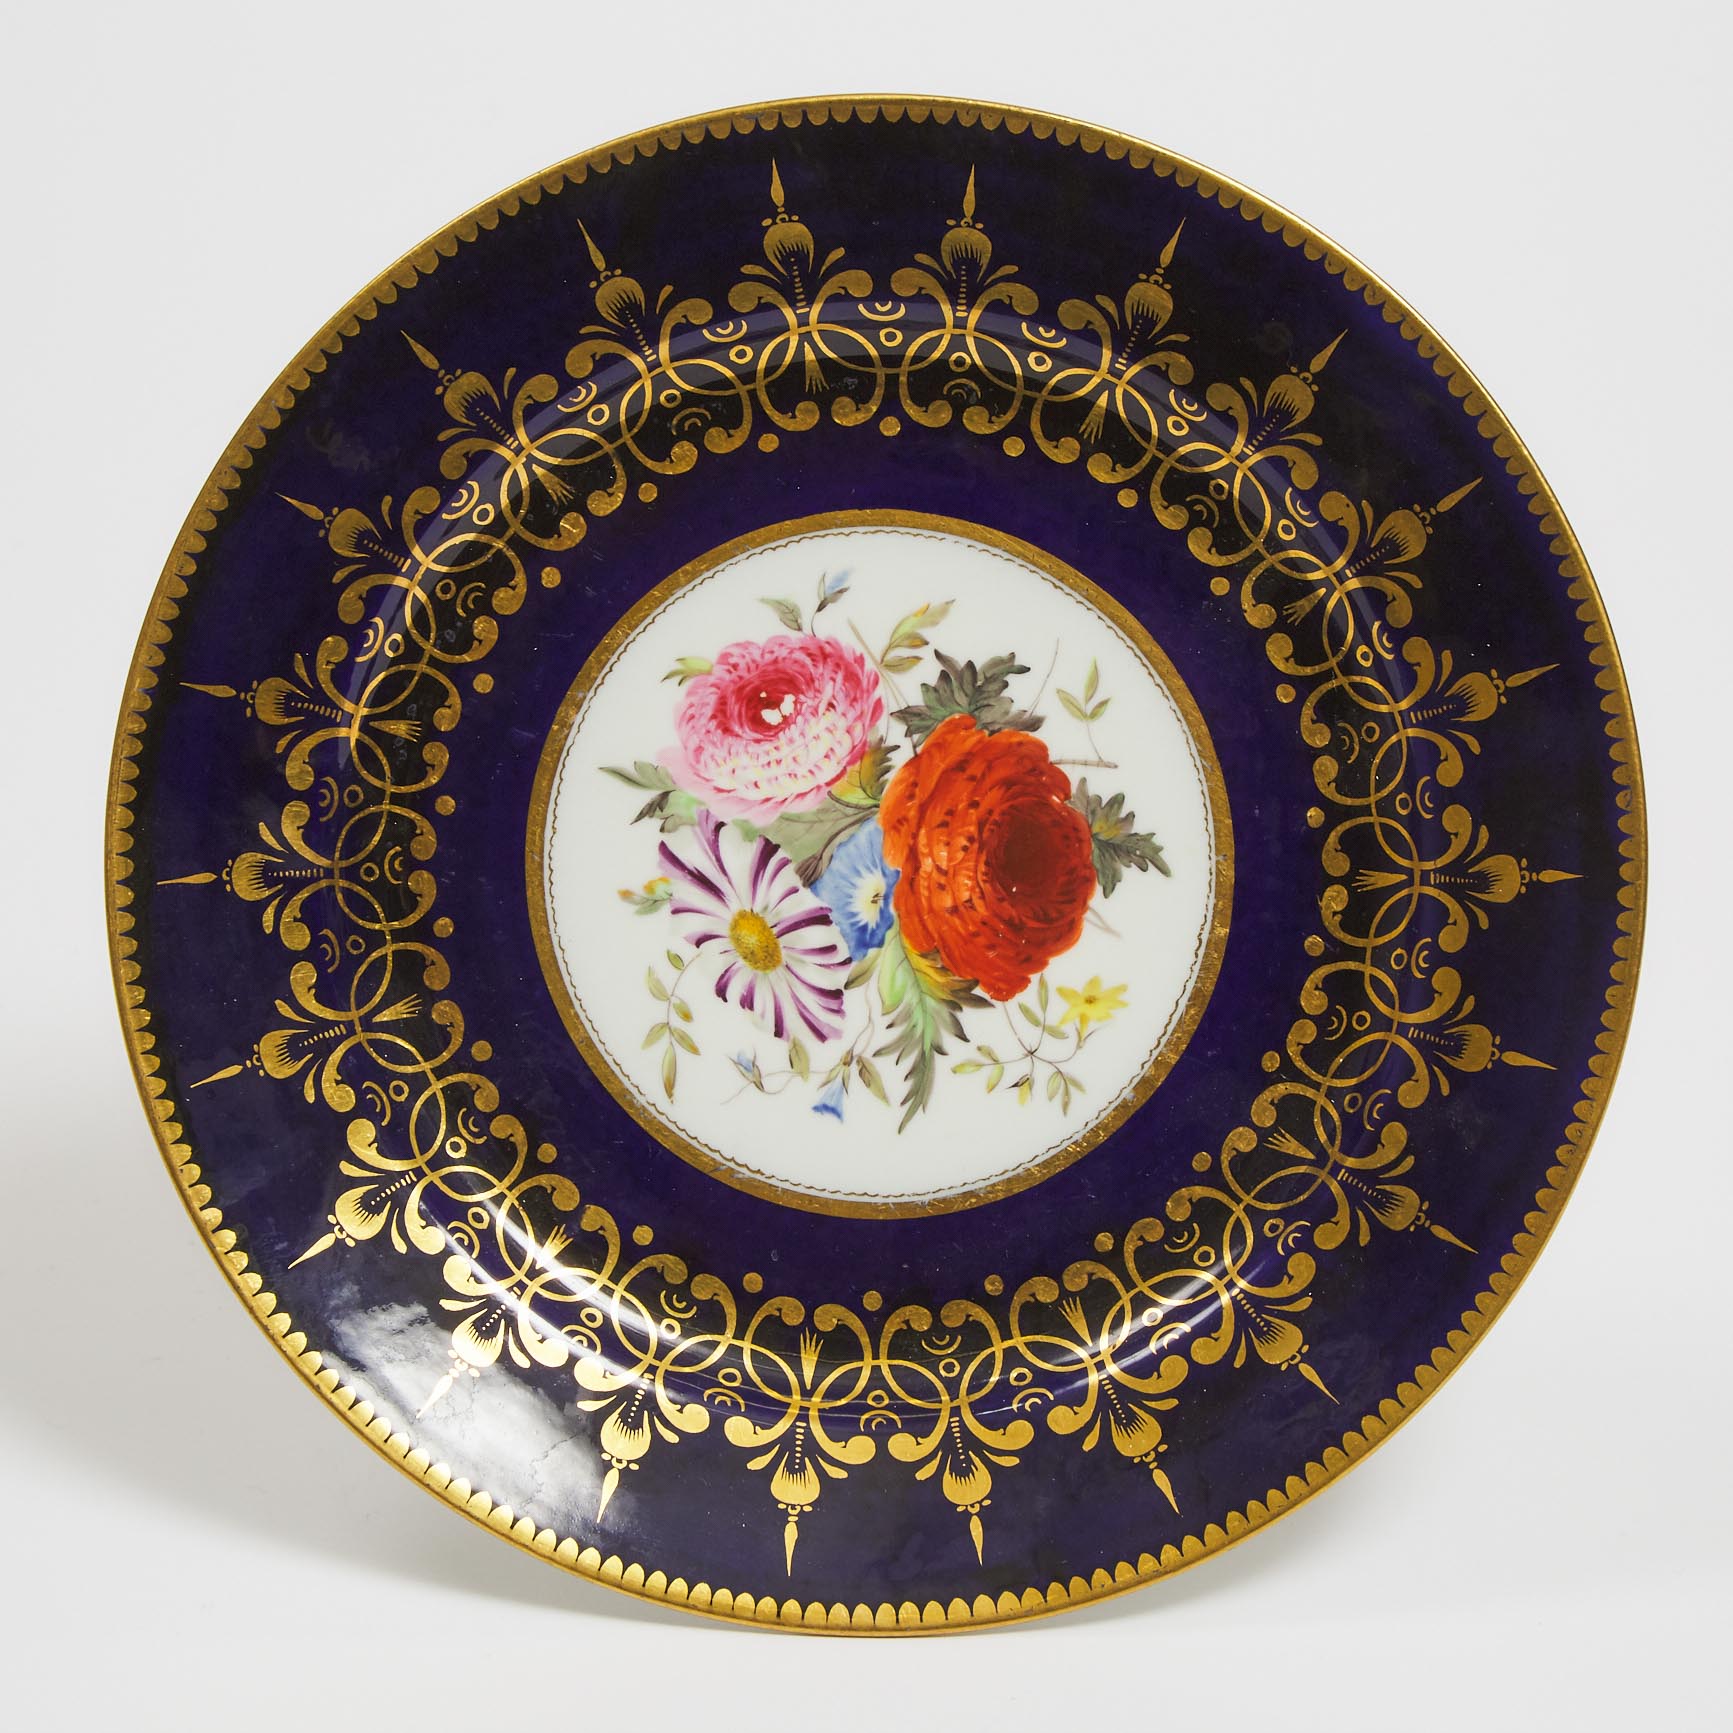 Chamberlains Worcester Blue and Gilt Ground Plate, c.1810